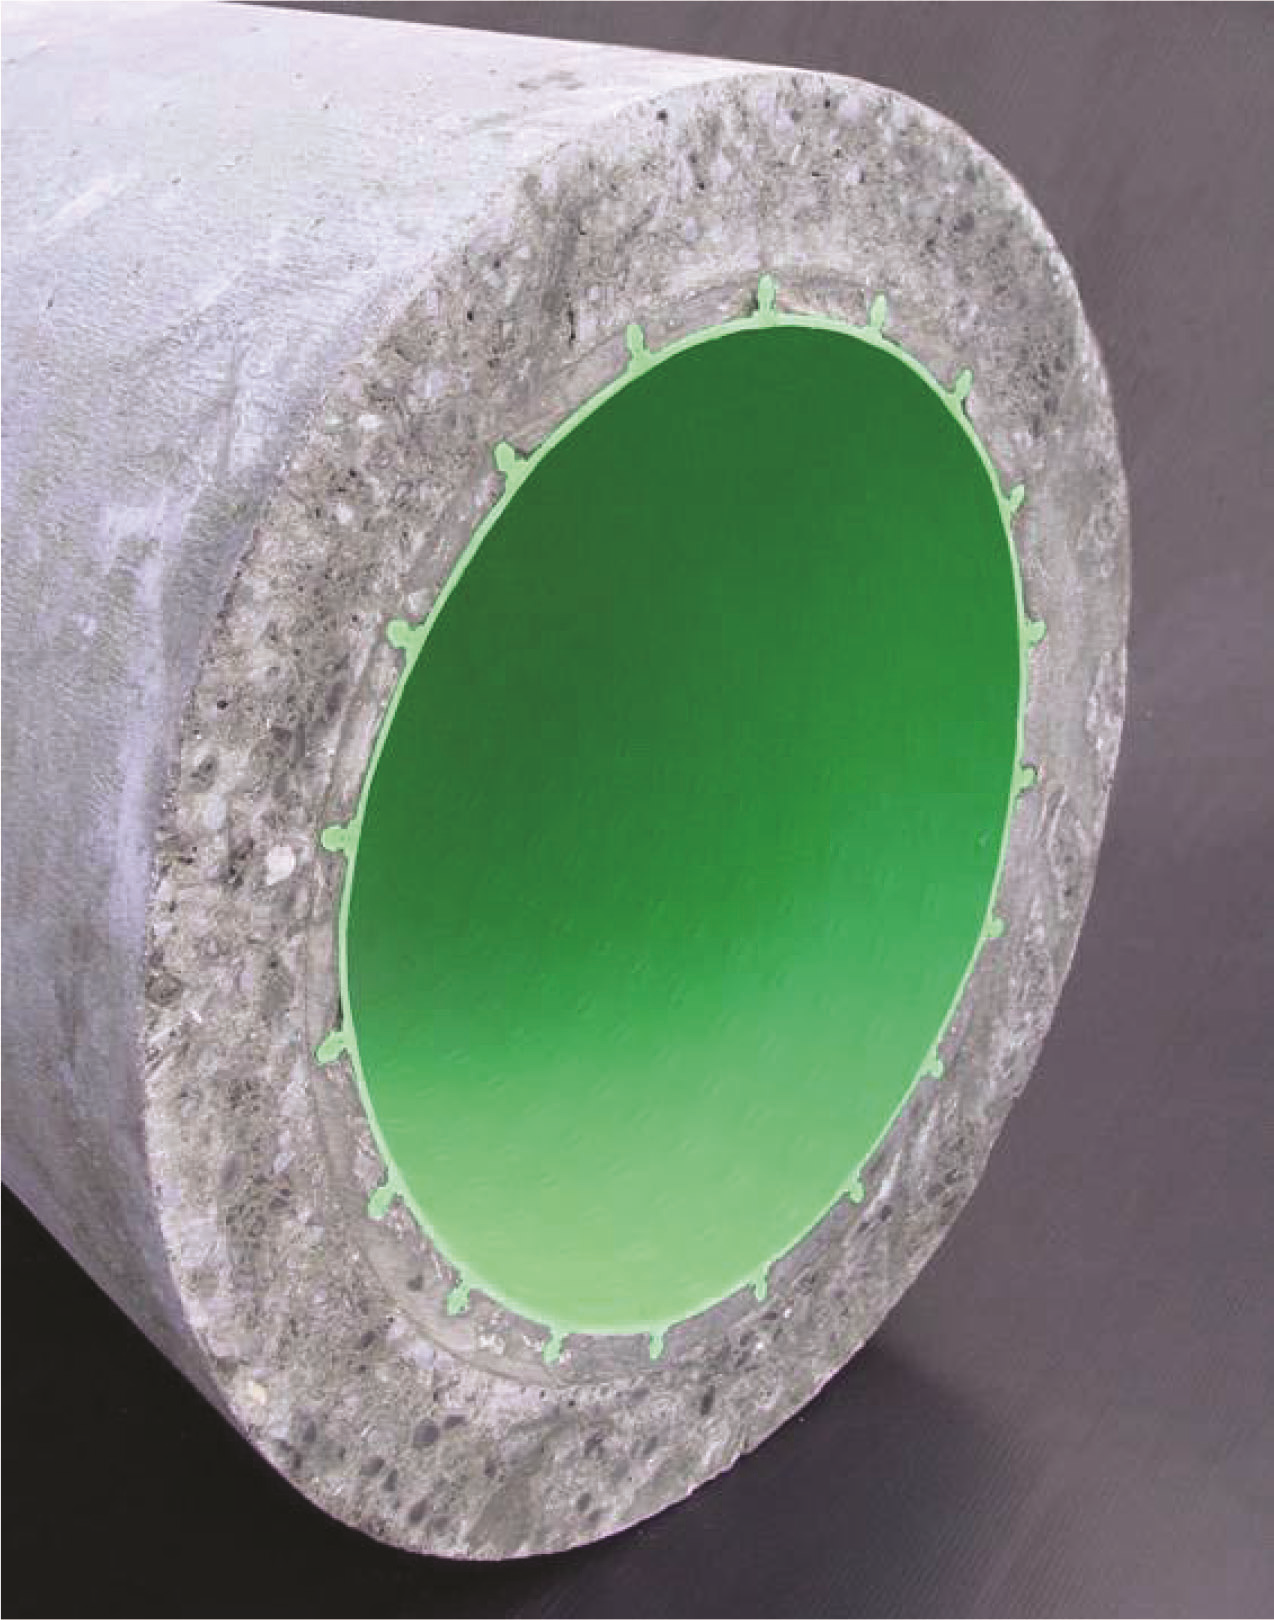 Reinforced concrete pipe with a line